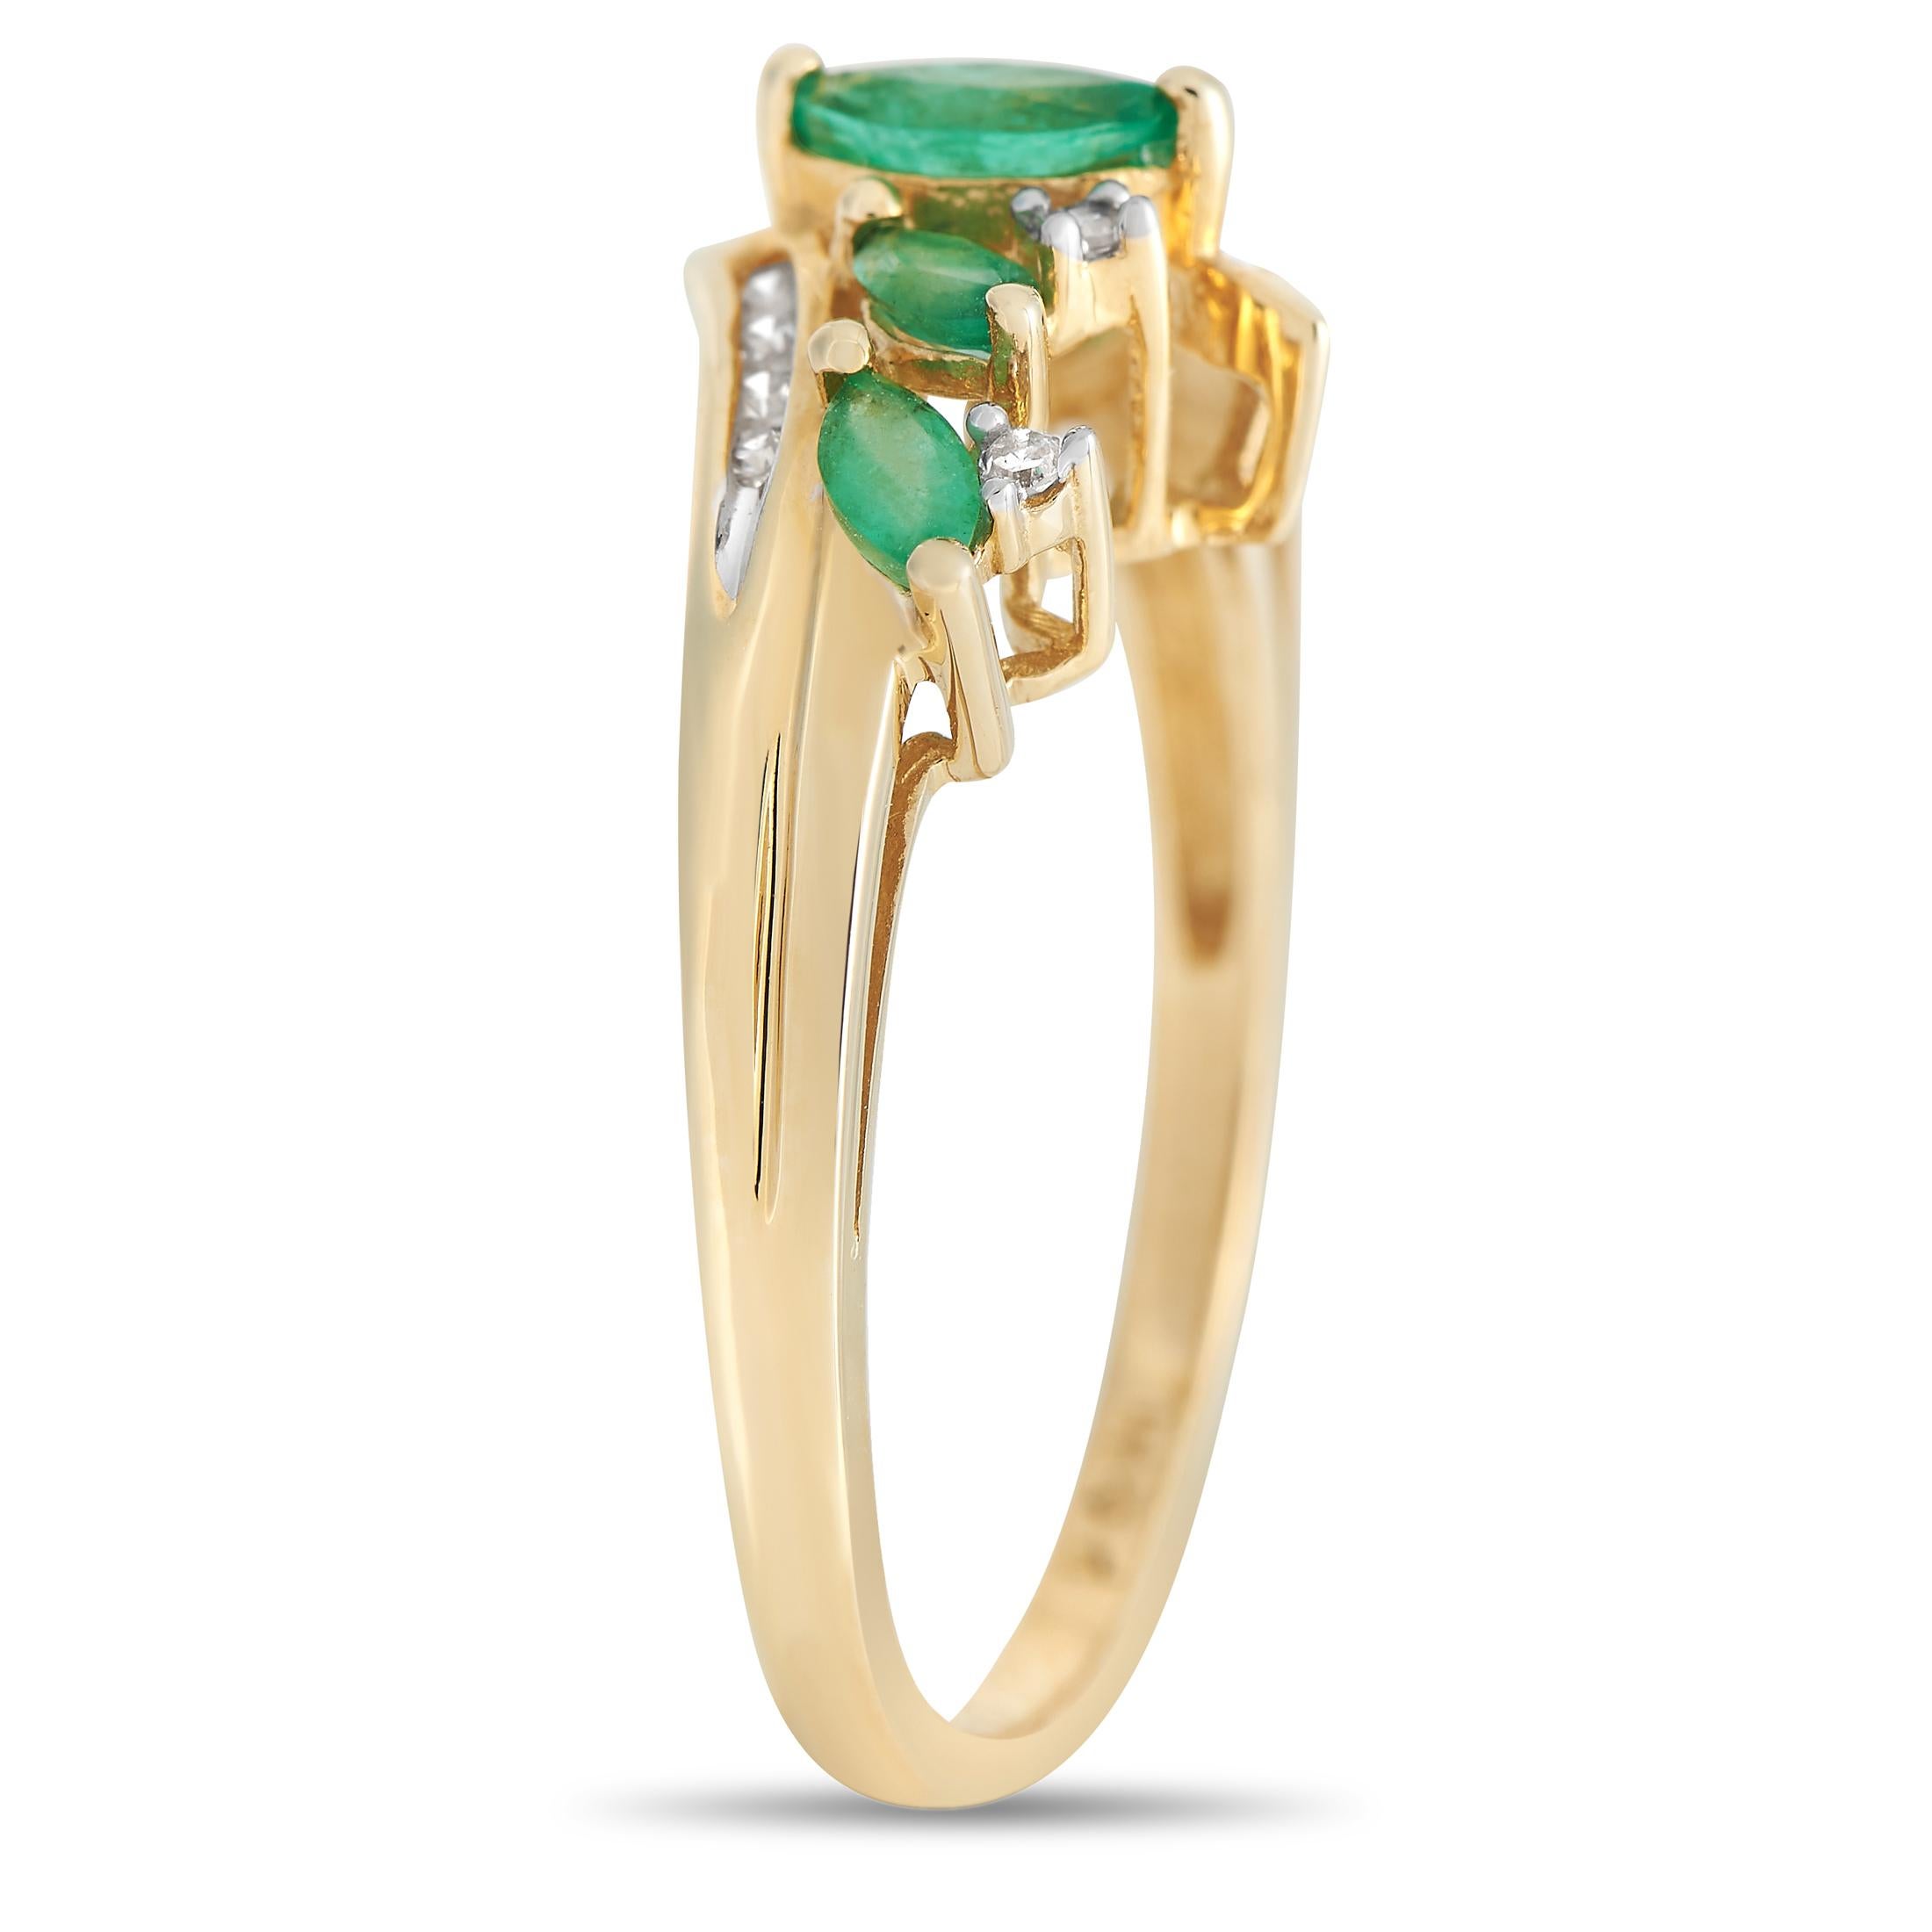 A series of Marquise cut Emerald gemstone make this luxury ring impossible to ignore. Crafted from 14K Yellow Gold, this elegant accessory also includes sparkling Diamond accents totaling 0.09 carats. This piece features a 2mm wide band and a top